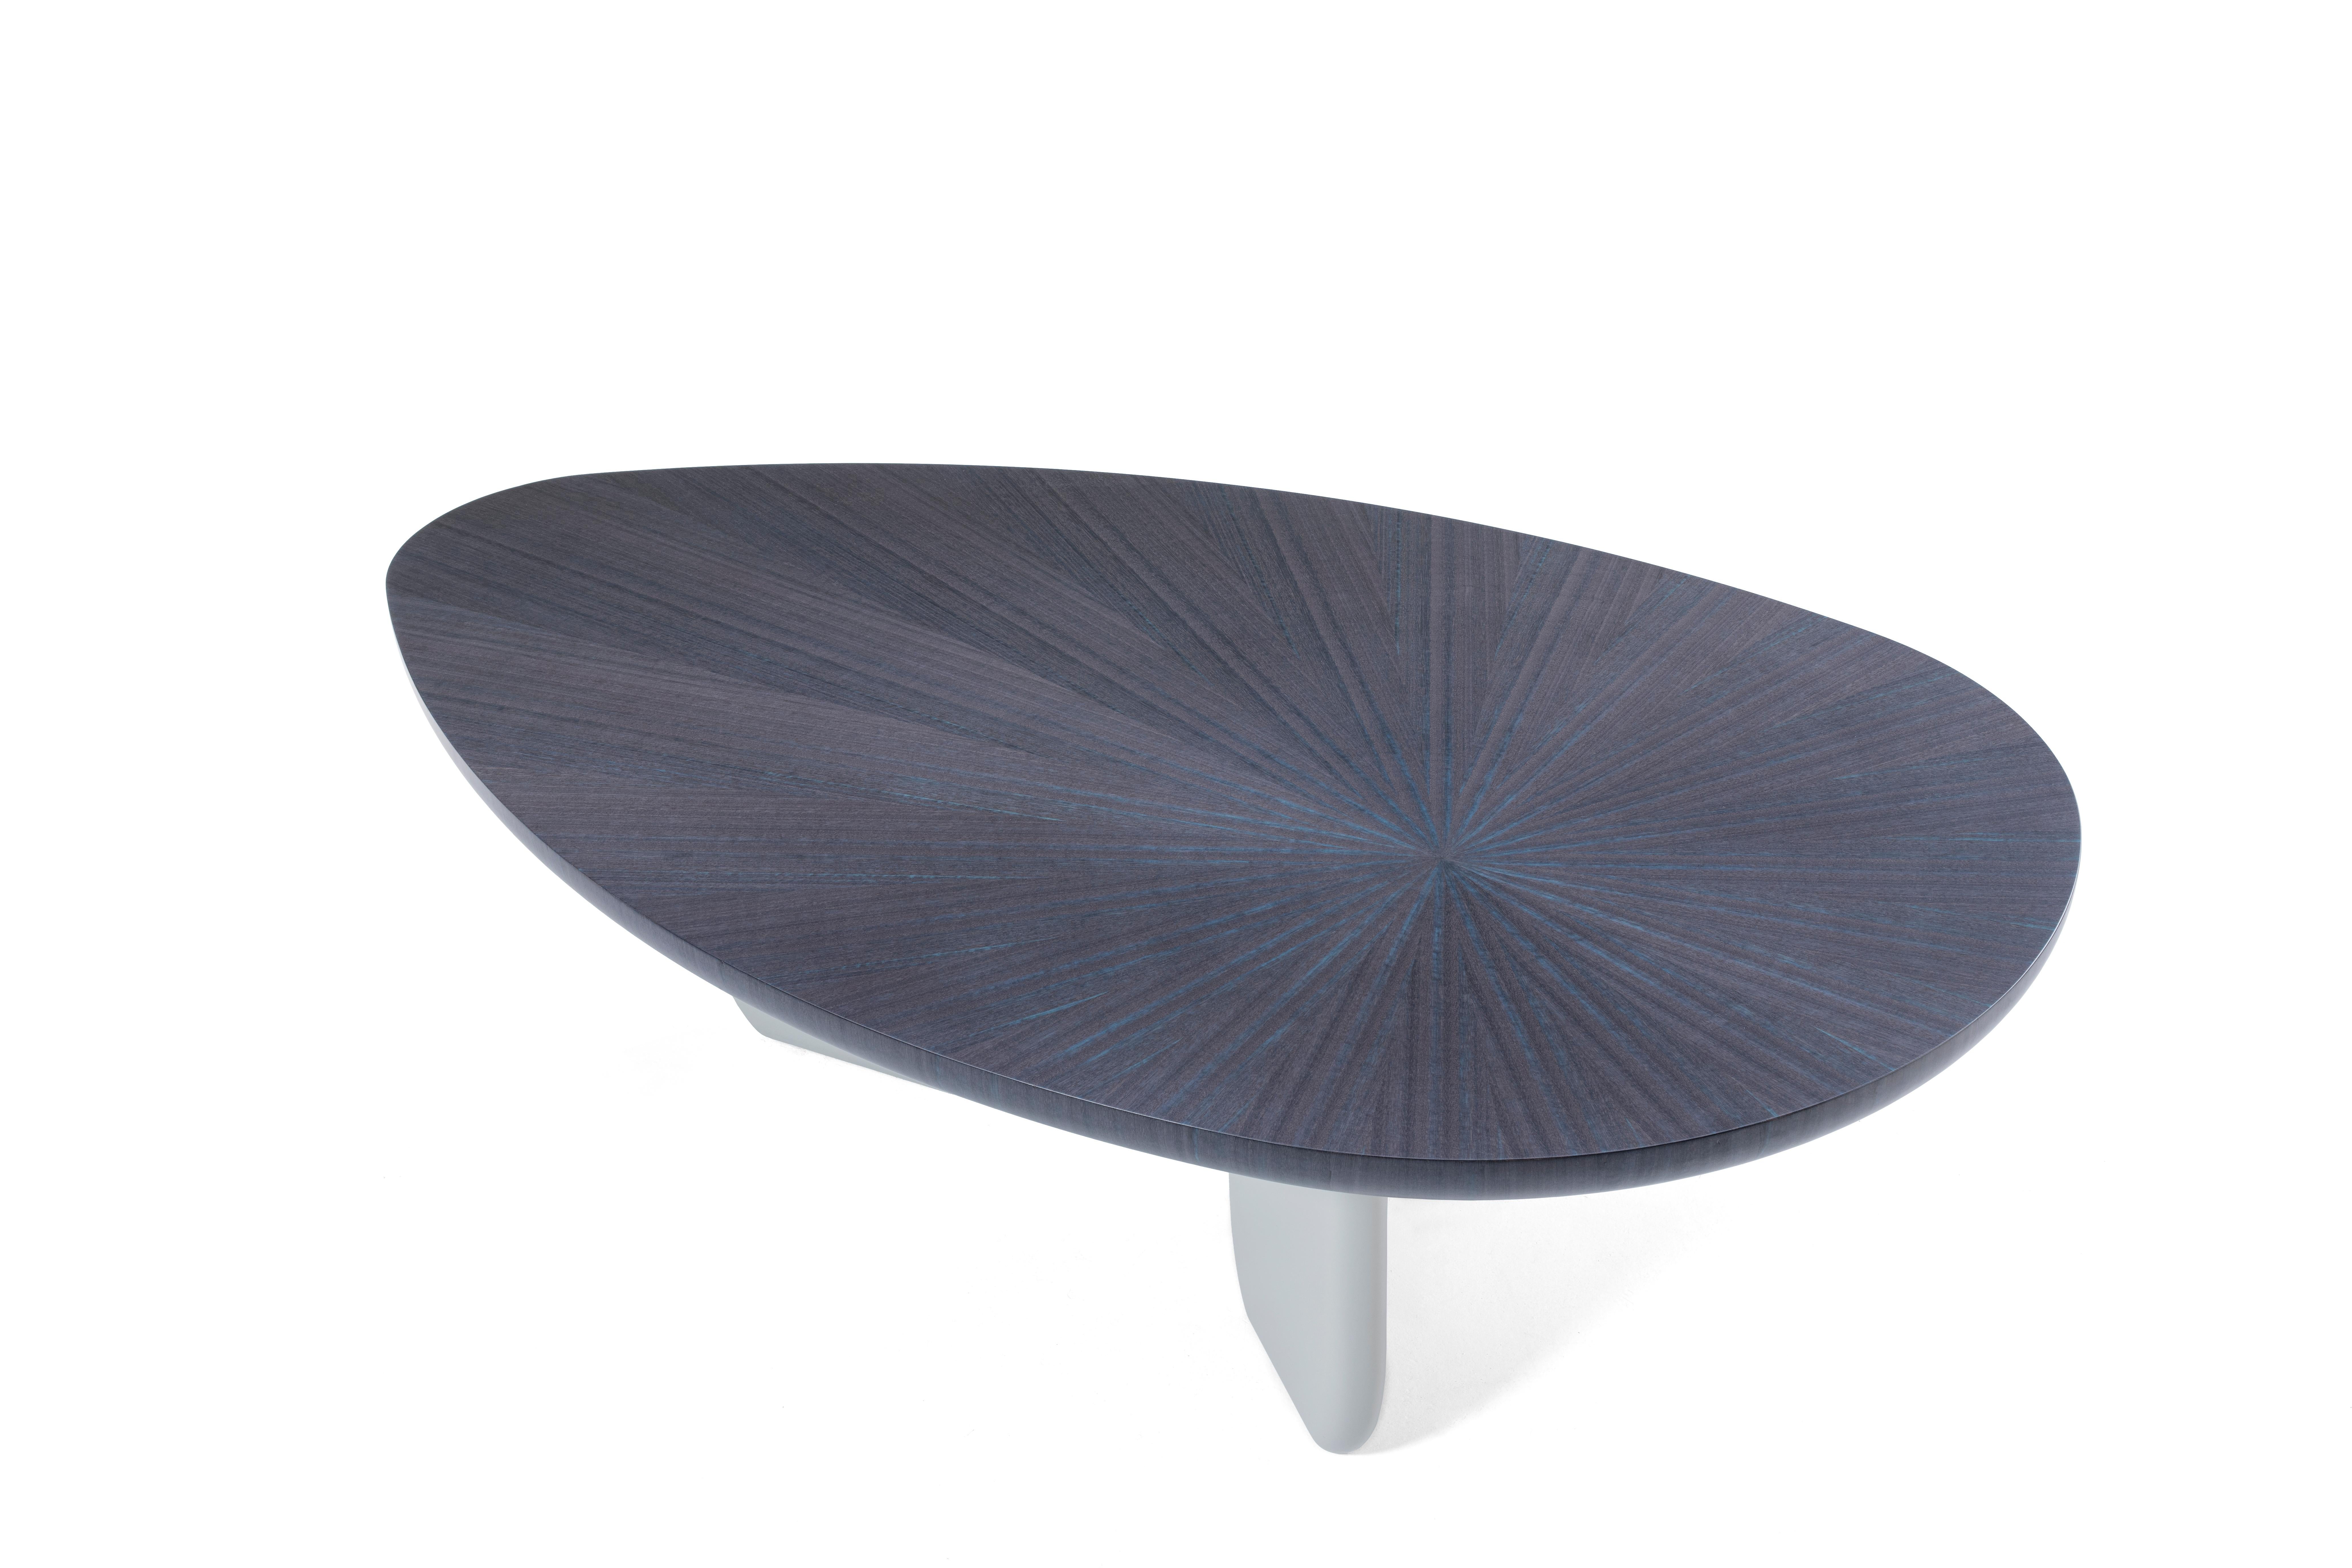 The original GINGA coffee table, finished in wood or lacquer, has an intriguingly long ellipse-shaped top combined with a three-legged base.
Available to order in a variety of woods and lacquer colors from the Casa Magna collection.

Shown in matte